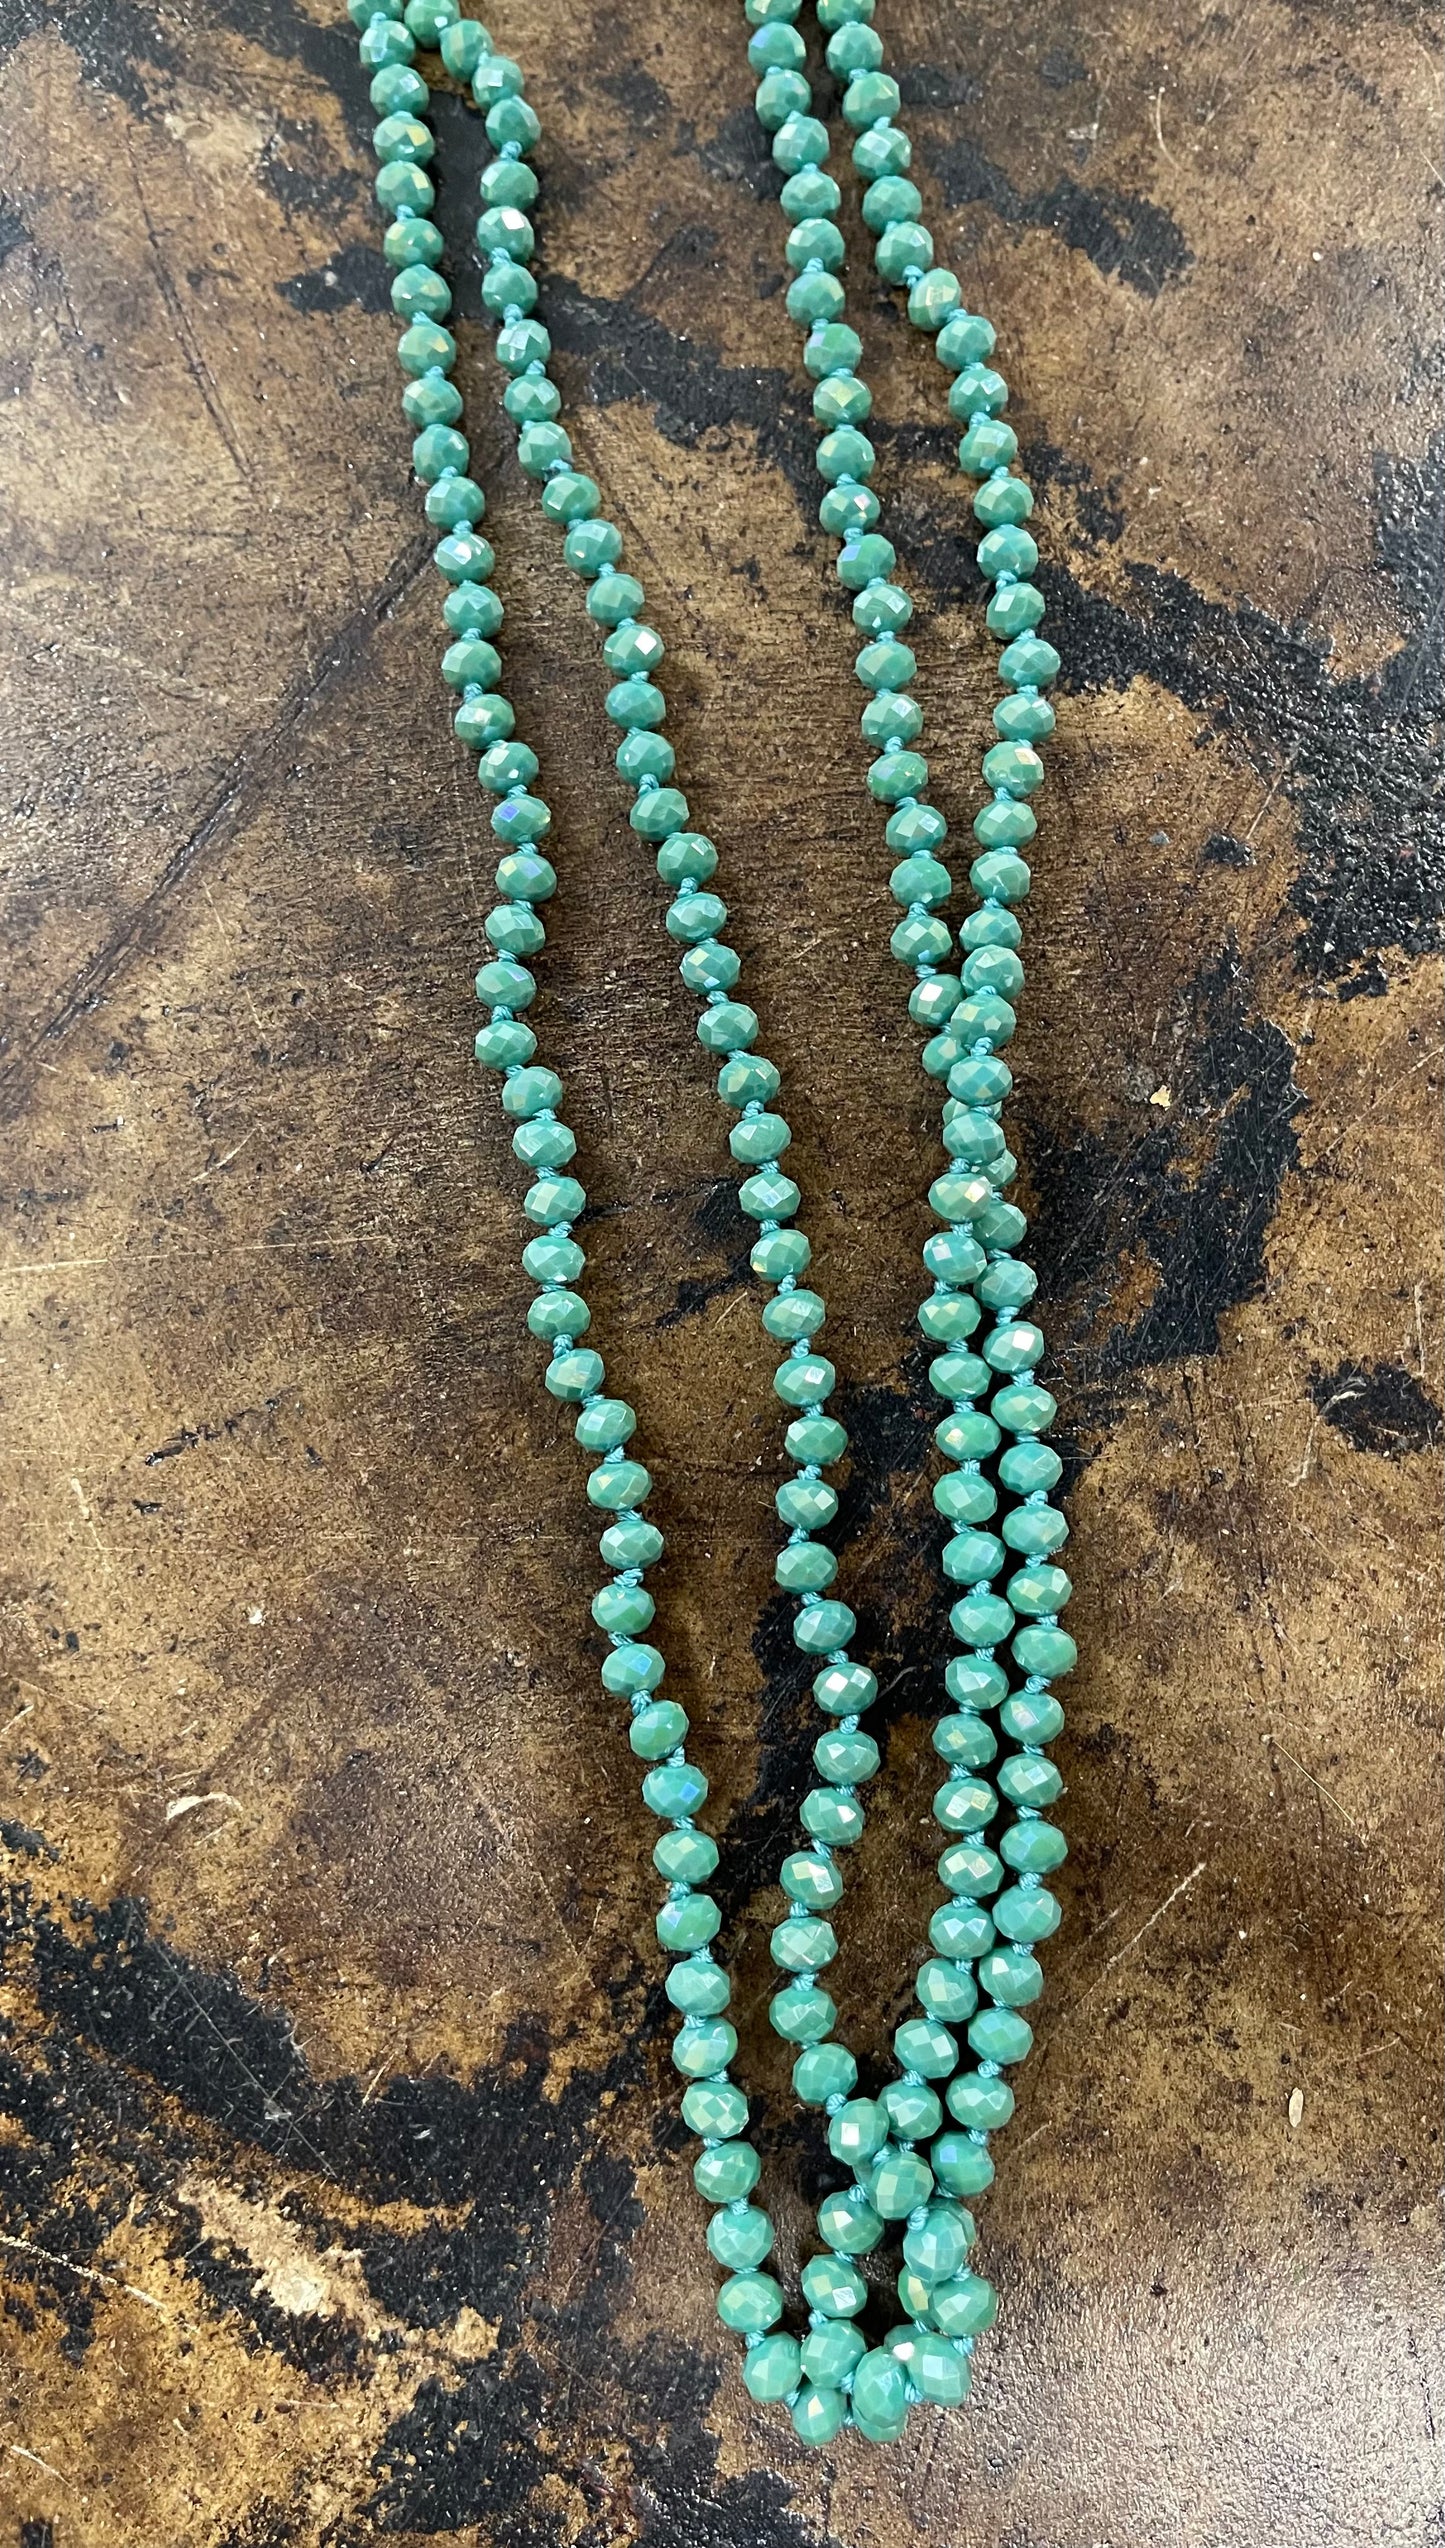 Nelly Western Turquoise 60" Hand Knotted Beaded Necklace